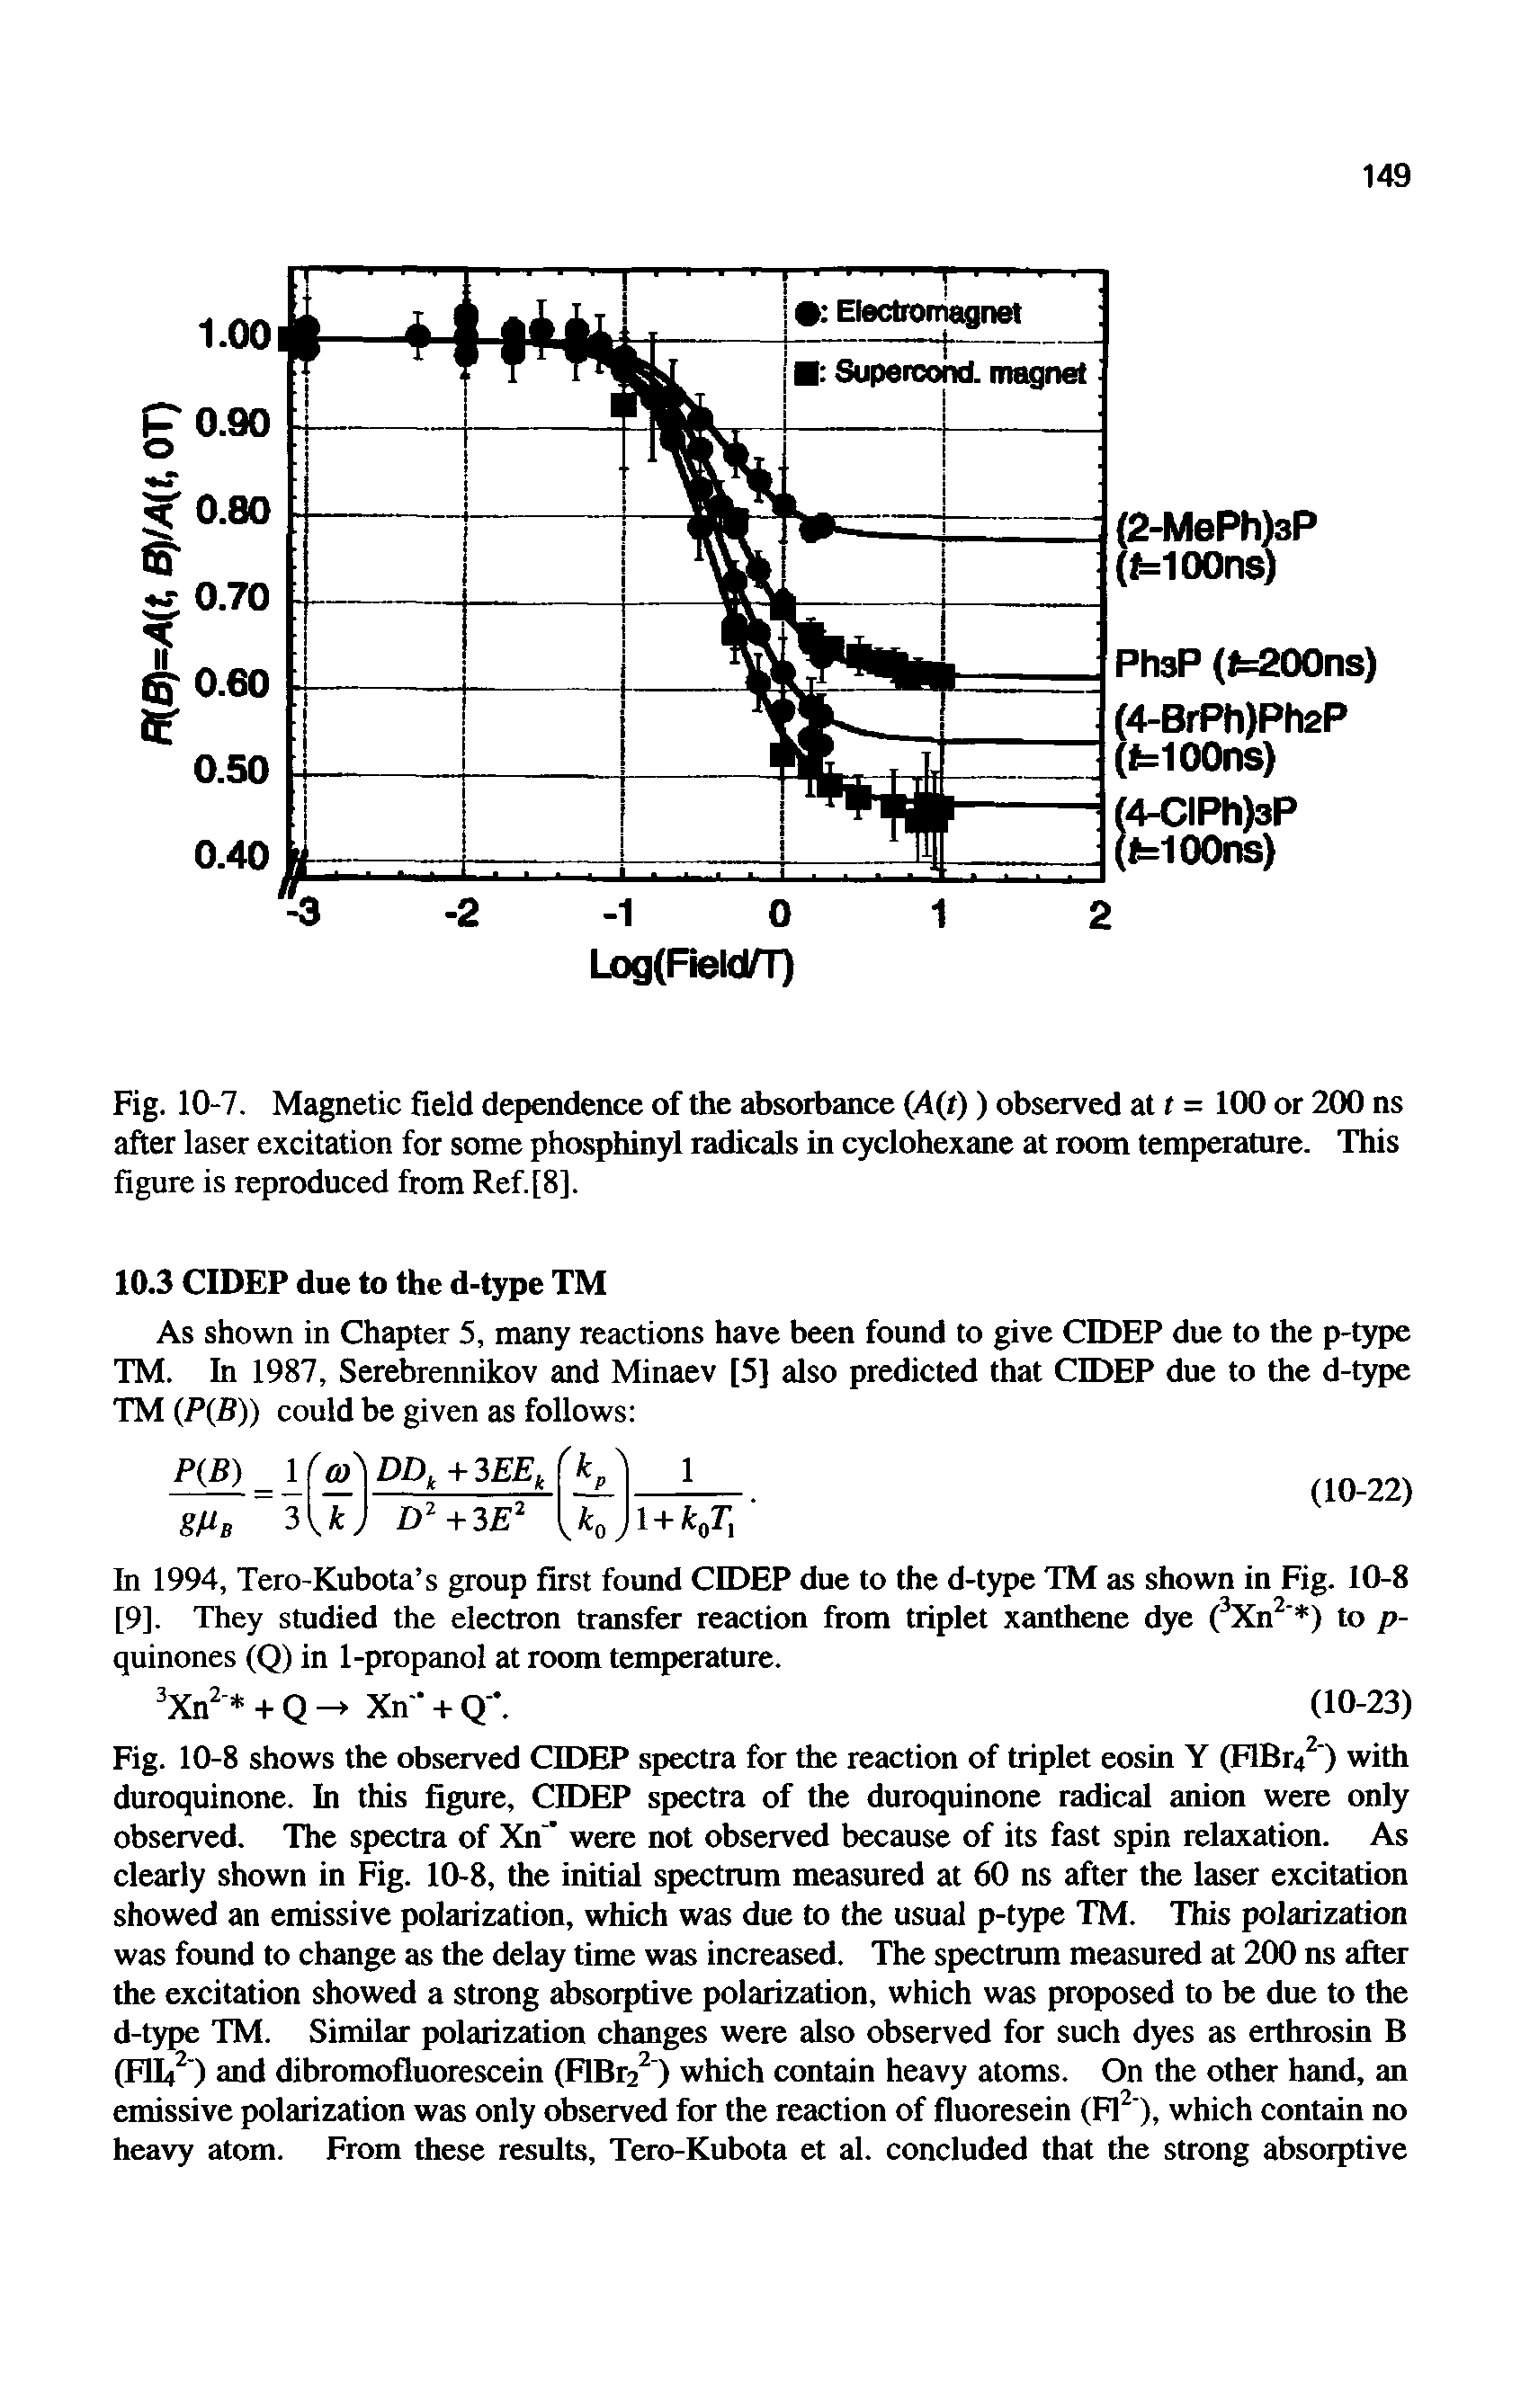 Fig. 10-7. Magnetic field dependence of the absorbance (A(t)) observed at r = 100 or 200 ns after laser excitation for some phosphinyl radicals in cyclohexane at room temperature. This figure is reproduced from Ref [8].